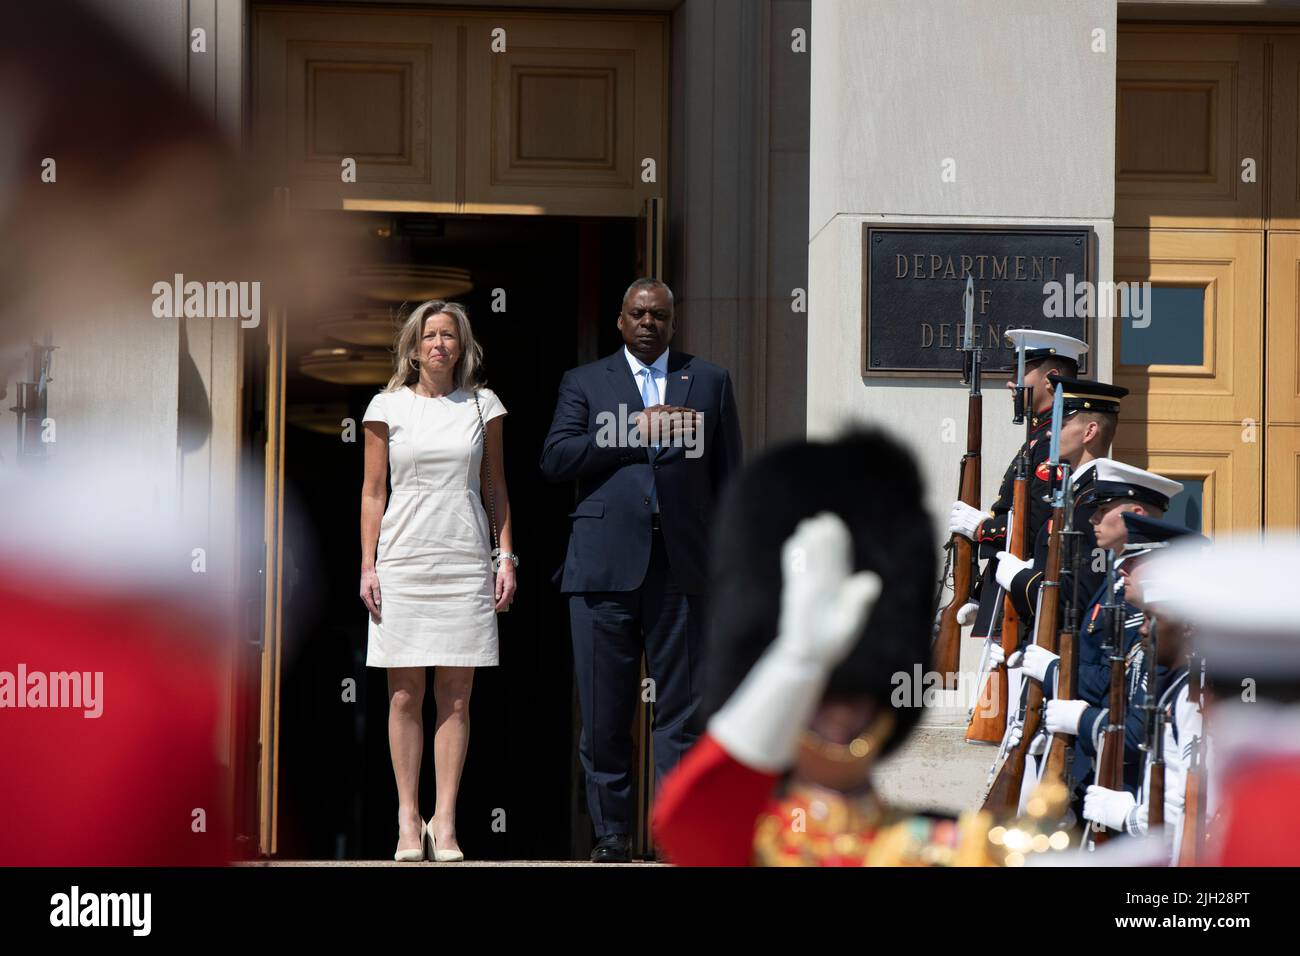 Arlington, United States Of America. 13th July, 2022. Arlington, United States of America. 13 July, 2022. U.S. Secretary of Defense Lloyd J. Austin III, right, stands with Dutch Defense Minister Kajsa Ollongren, during the arrival ceremony at the Pentagon, July 13, 2022 in Arlington, Virginia. Credit: Lisa Ferdinando/DOD/Alamy Live News Stock Photo